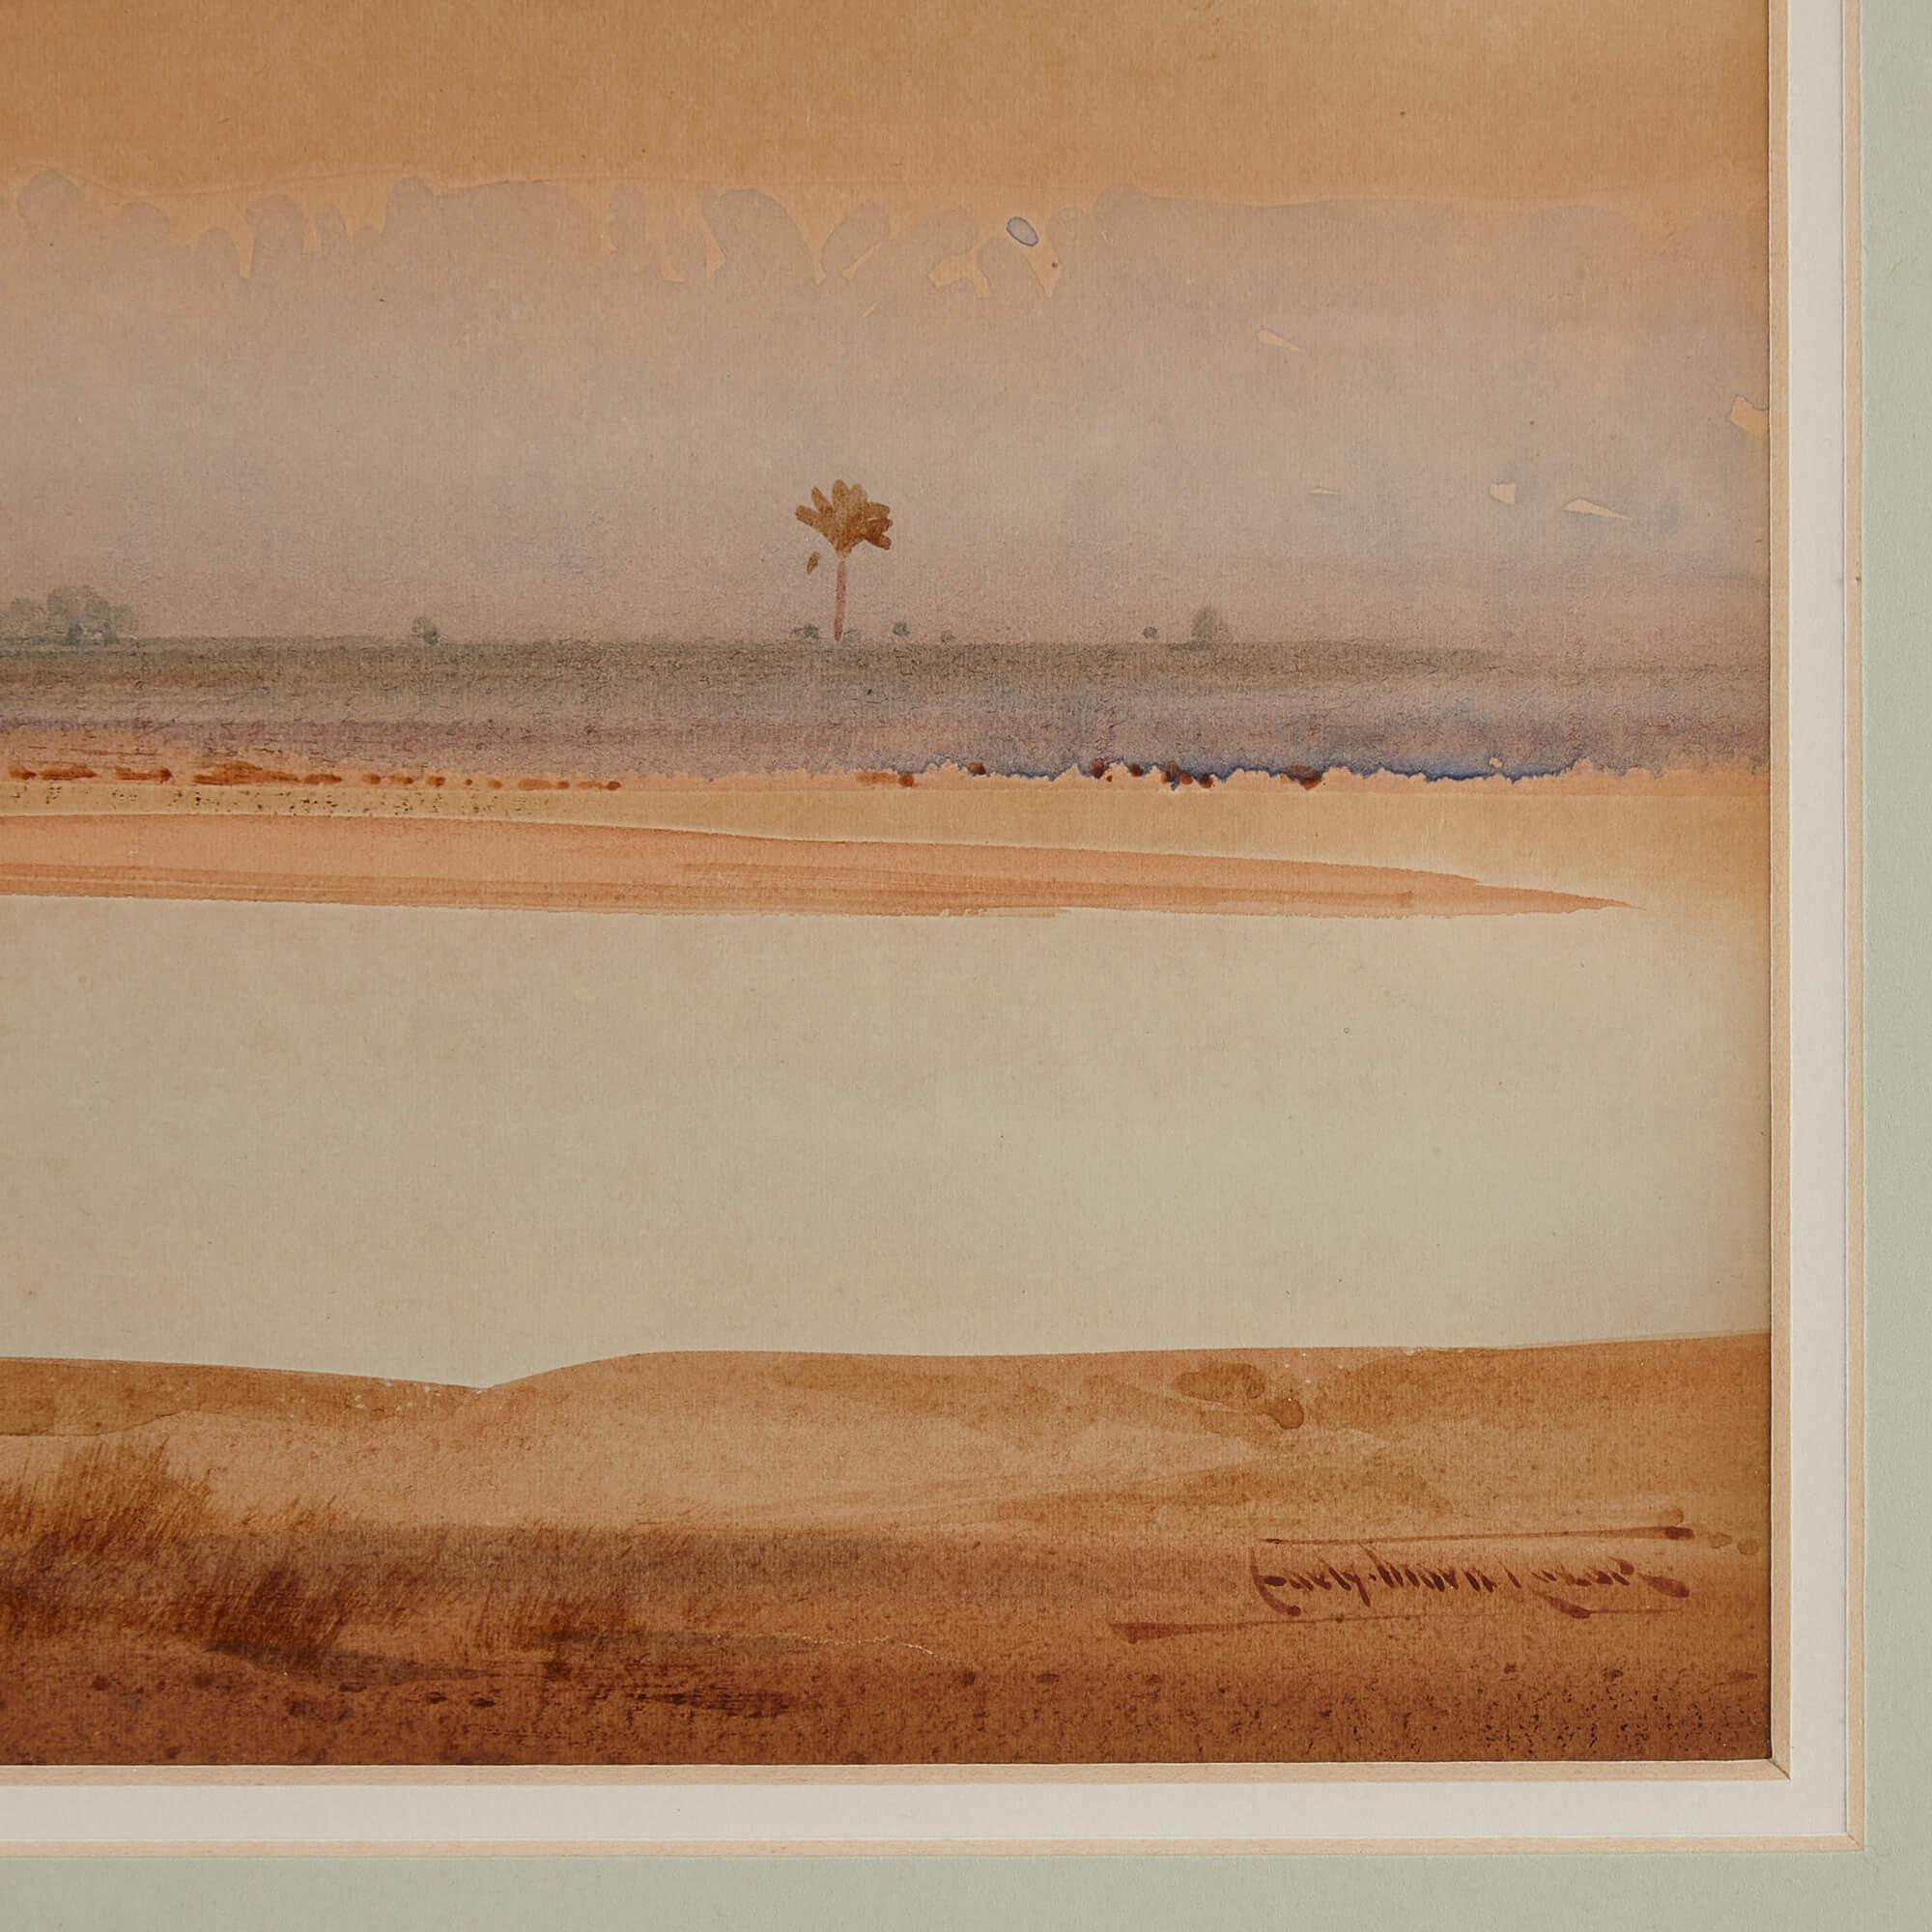 Pair of Orientalist watercolour paintings of desert landscapes by A. Lamplough
English, c.1910
Frames: height 35cm, width 72cm, depth 3cm
Paintings: height 23cm, width 60cm

By a talented English artist active around the turn of the twentieth